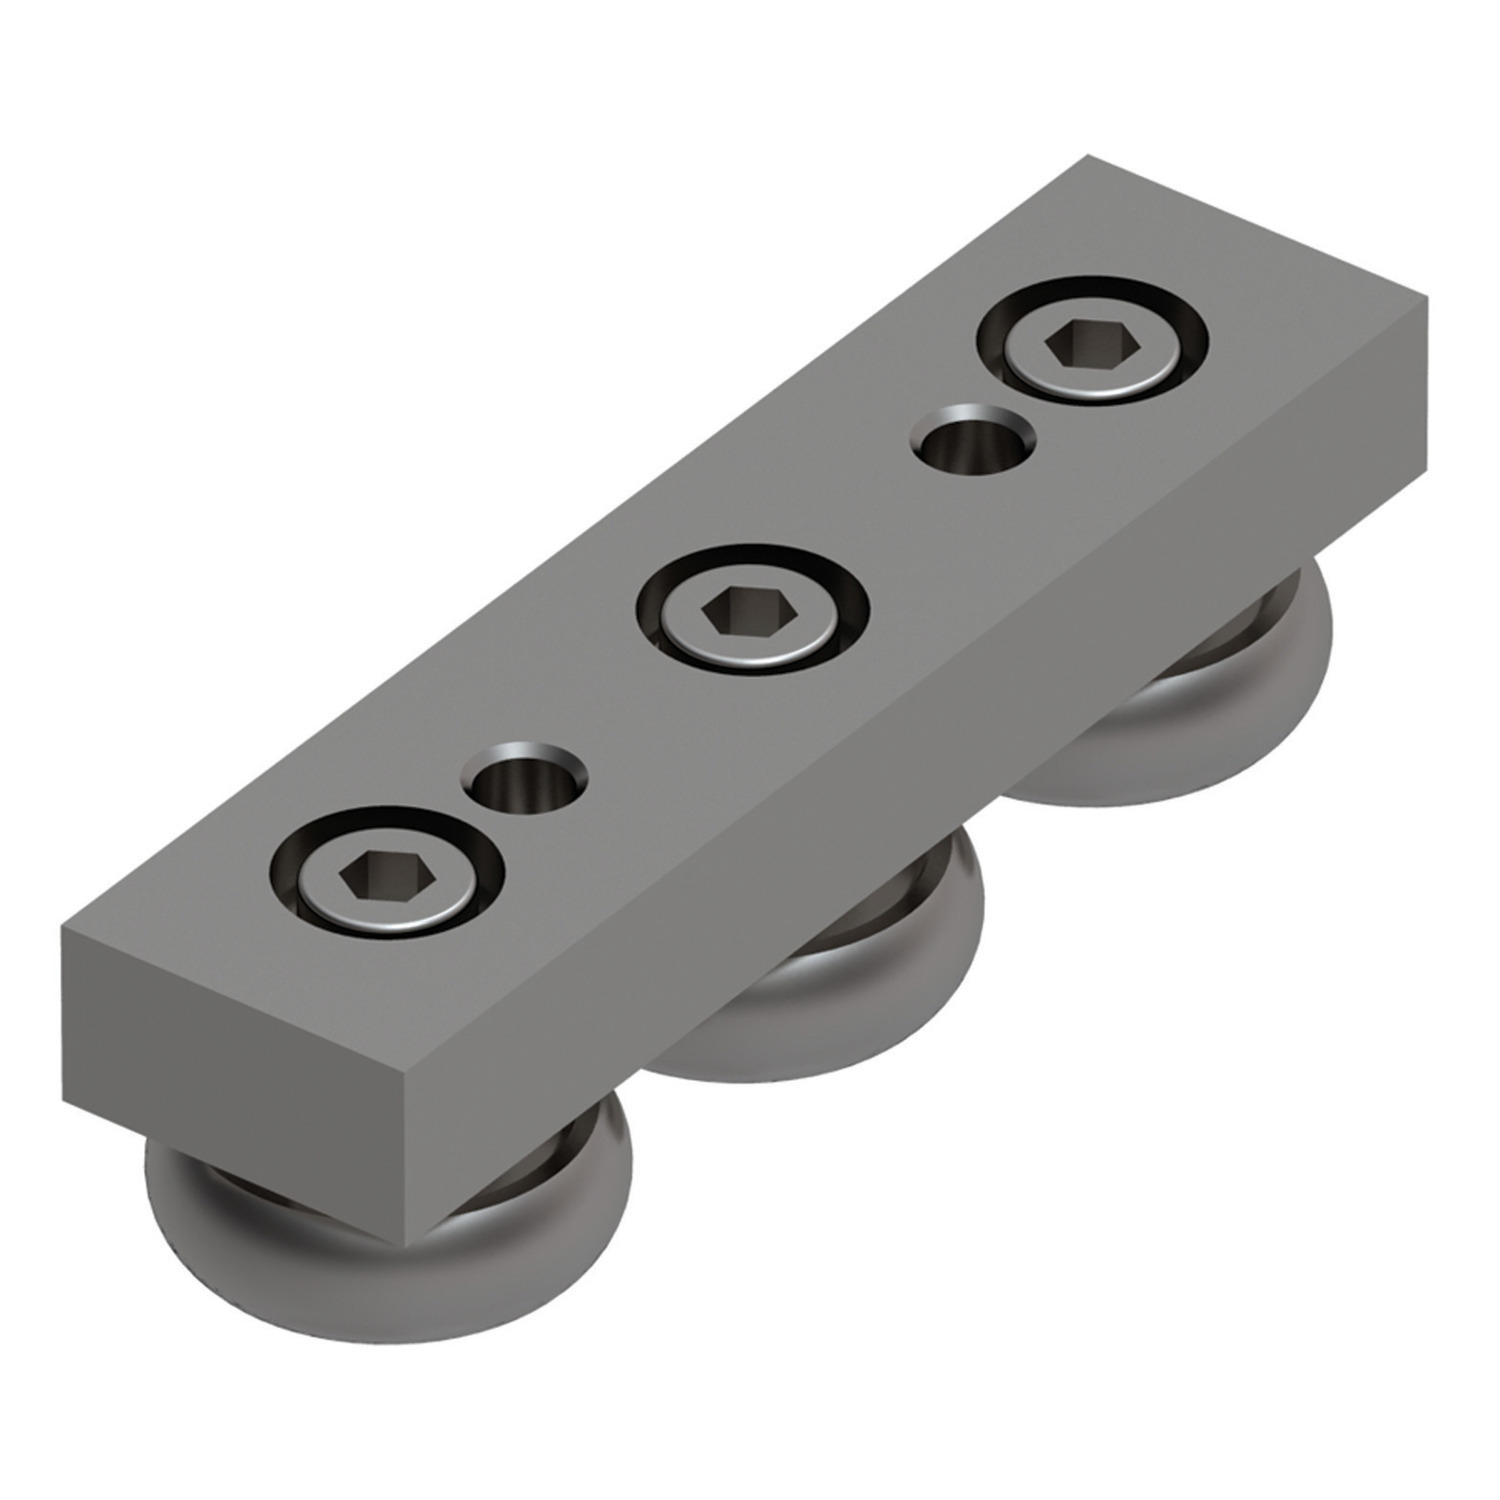 Product L1970.SB, Solid Body Steel Sliders for T rail (master) / 